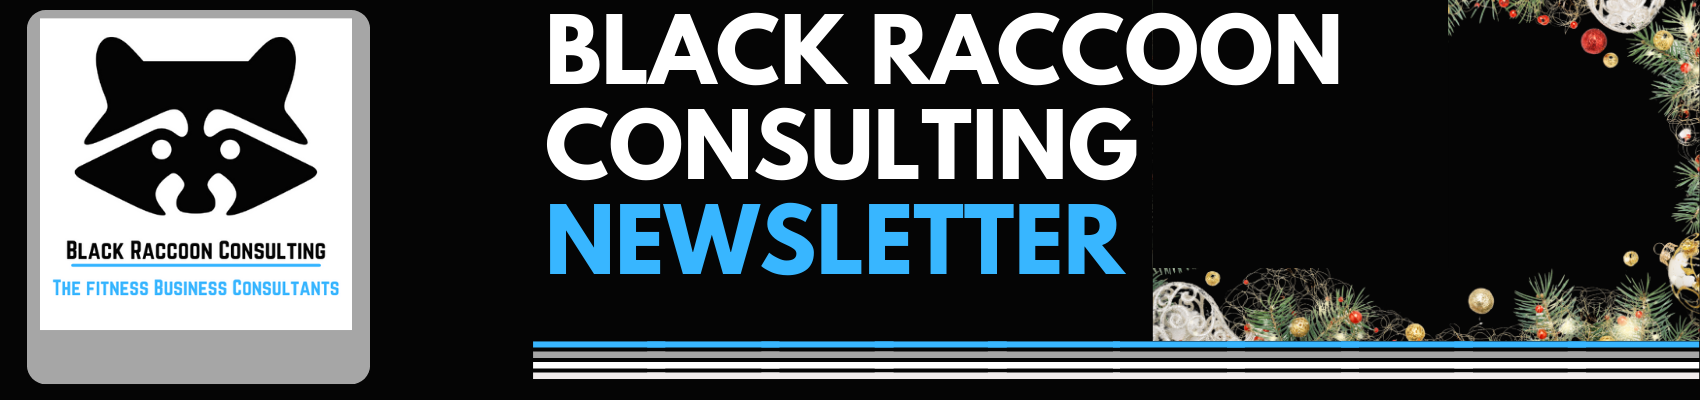 Black raccoon Consulting Newsletter